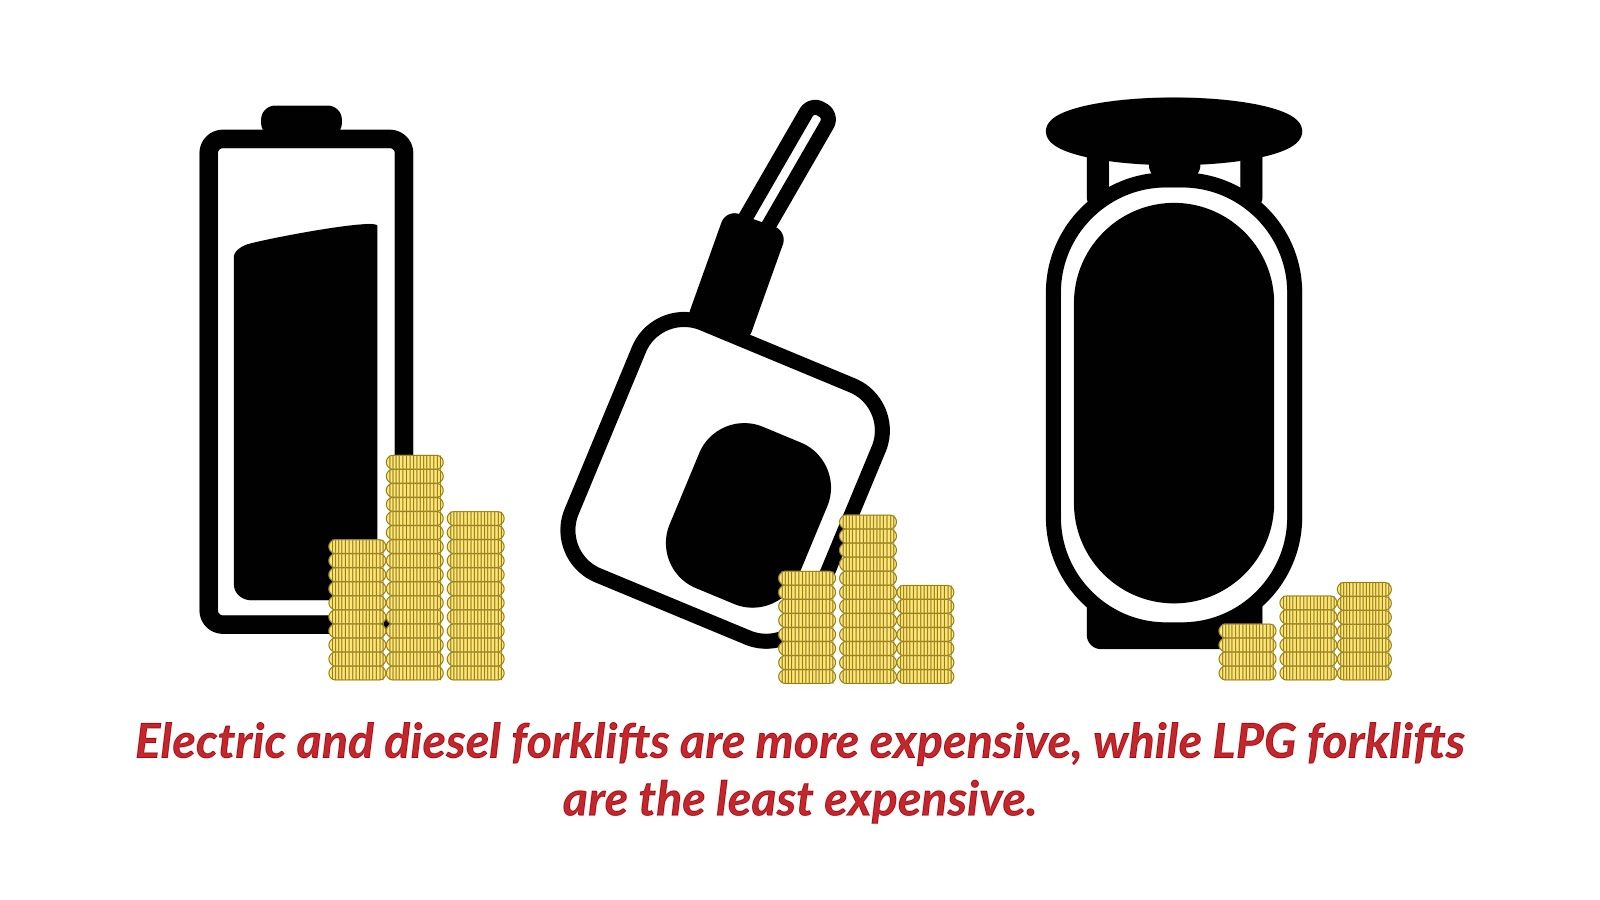 Electric and diesel forklifts are more expensive, while LPG forklifts are the least expensive.